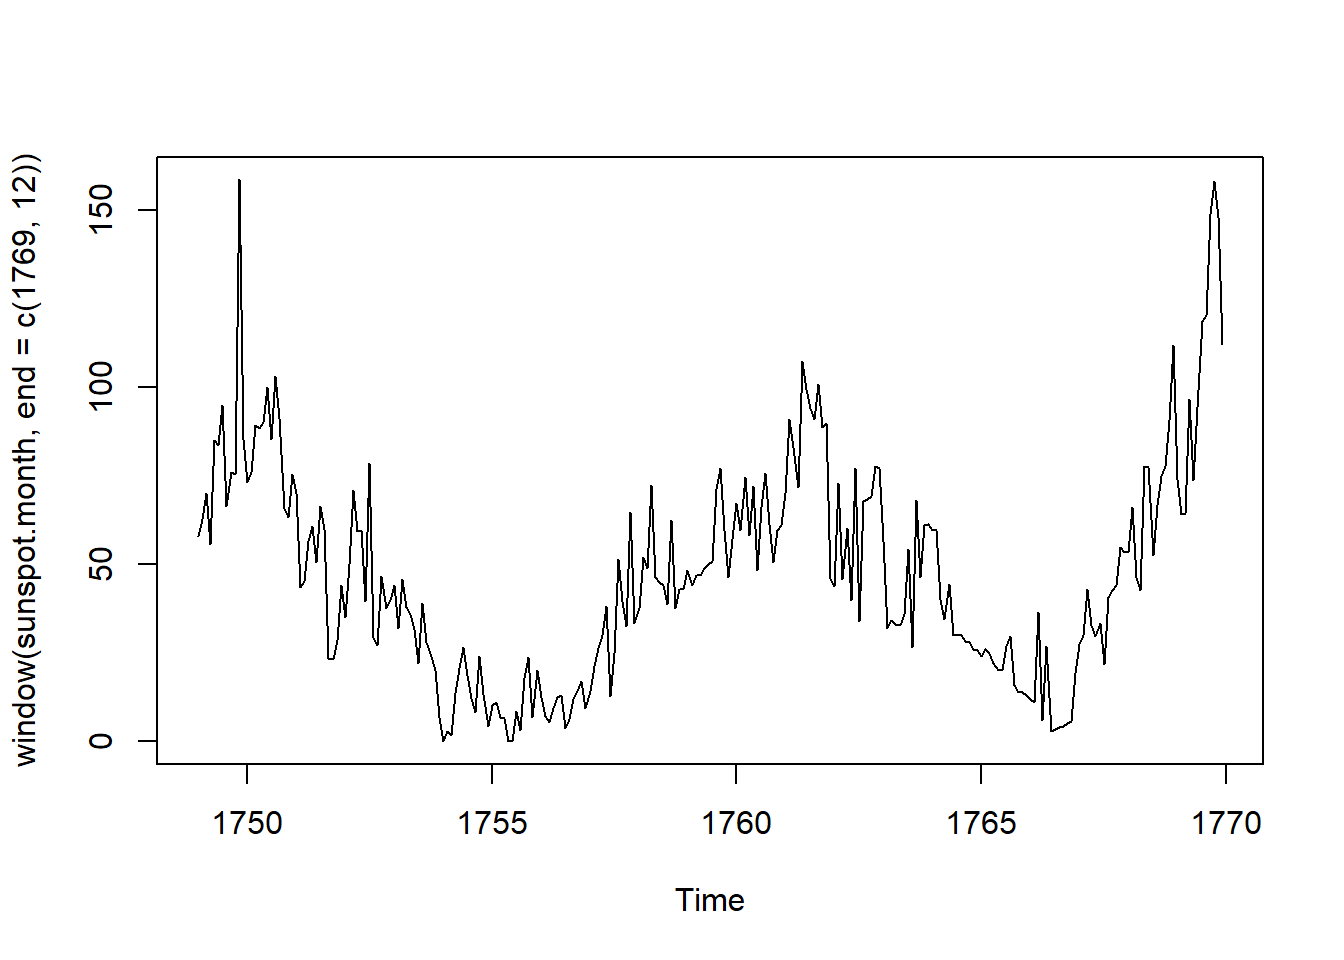 Sunspots of the first 20 years of data